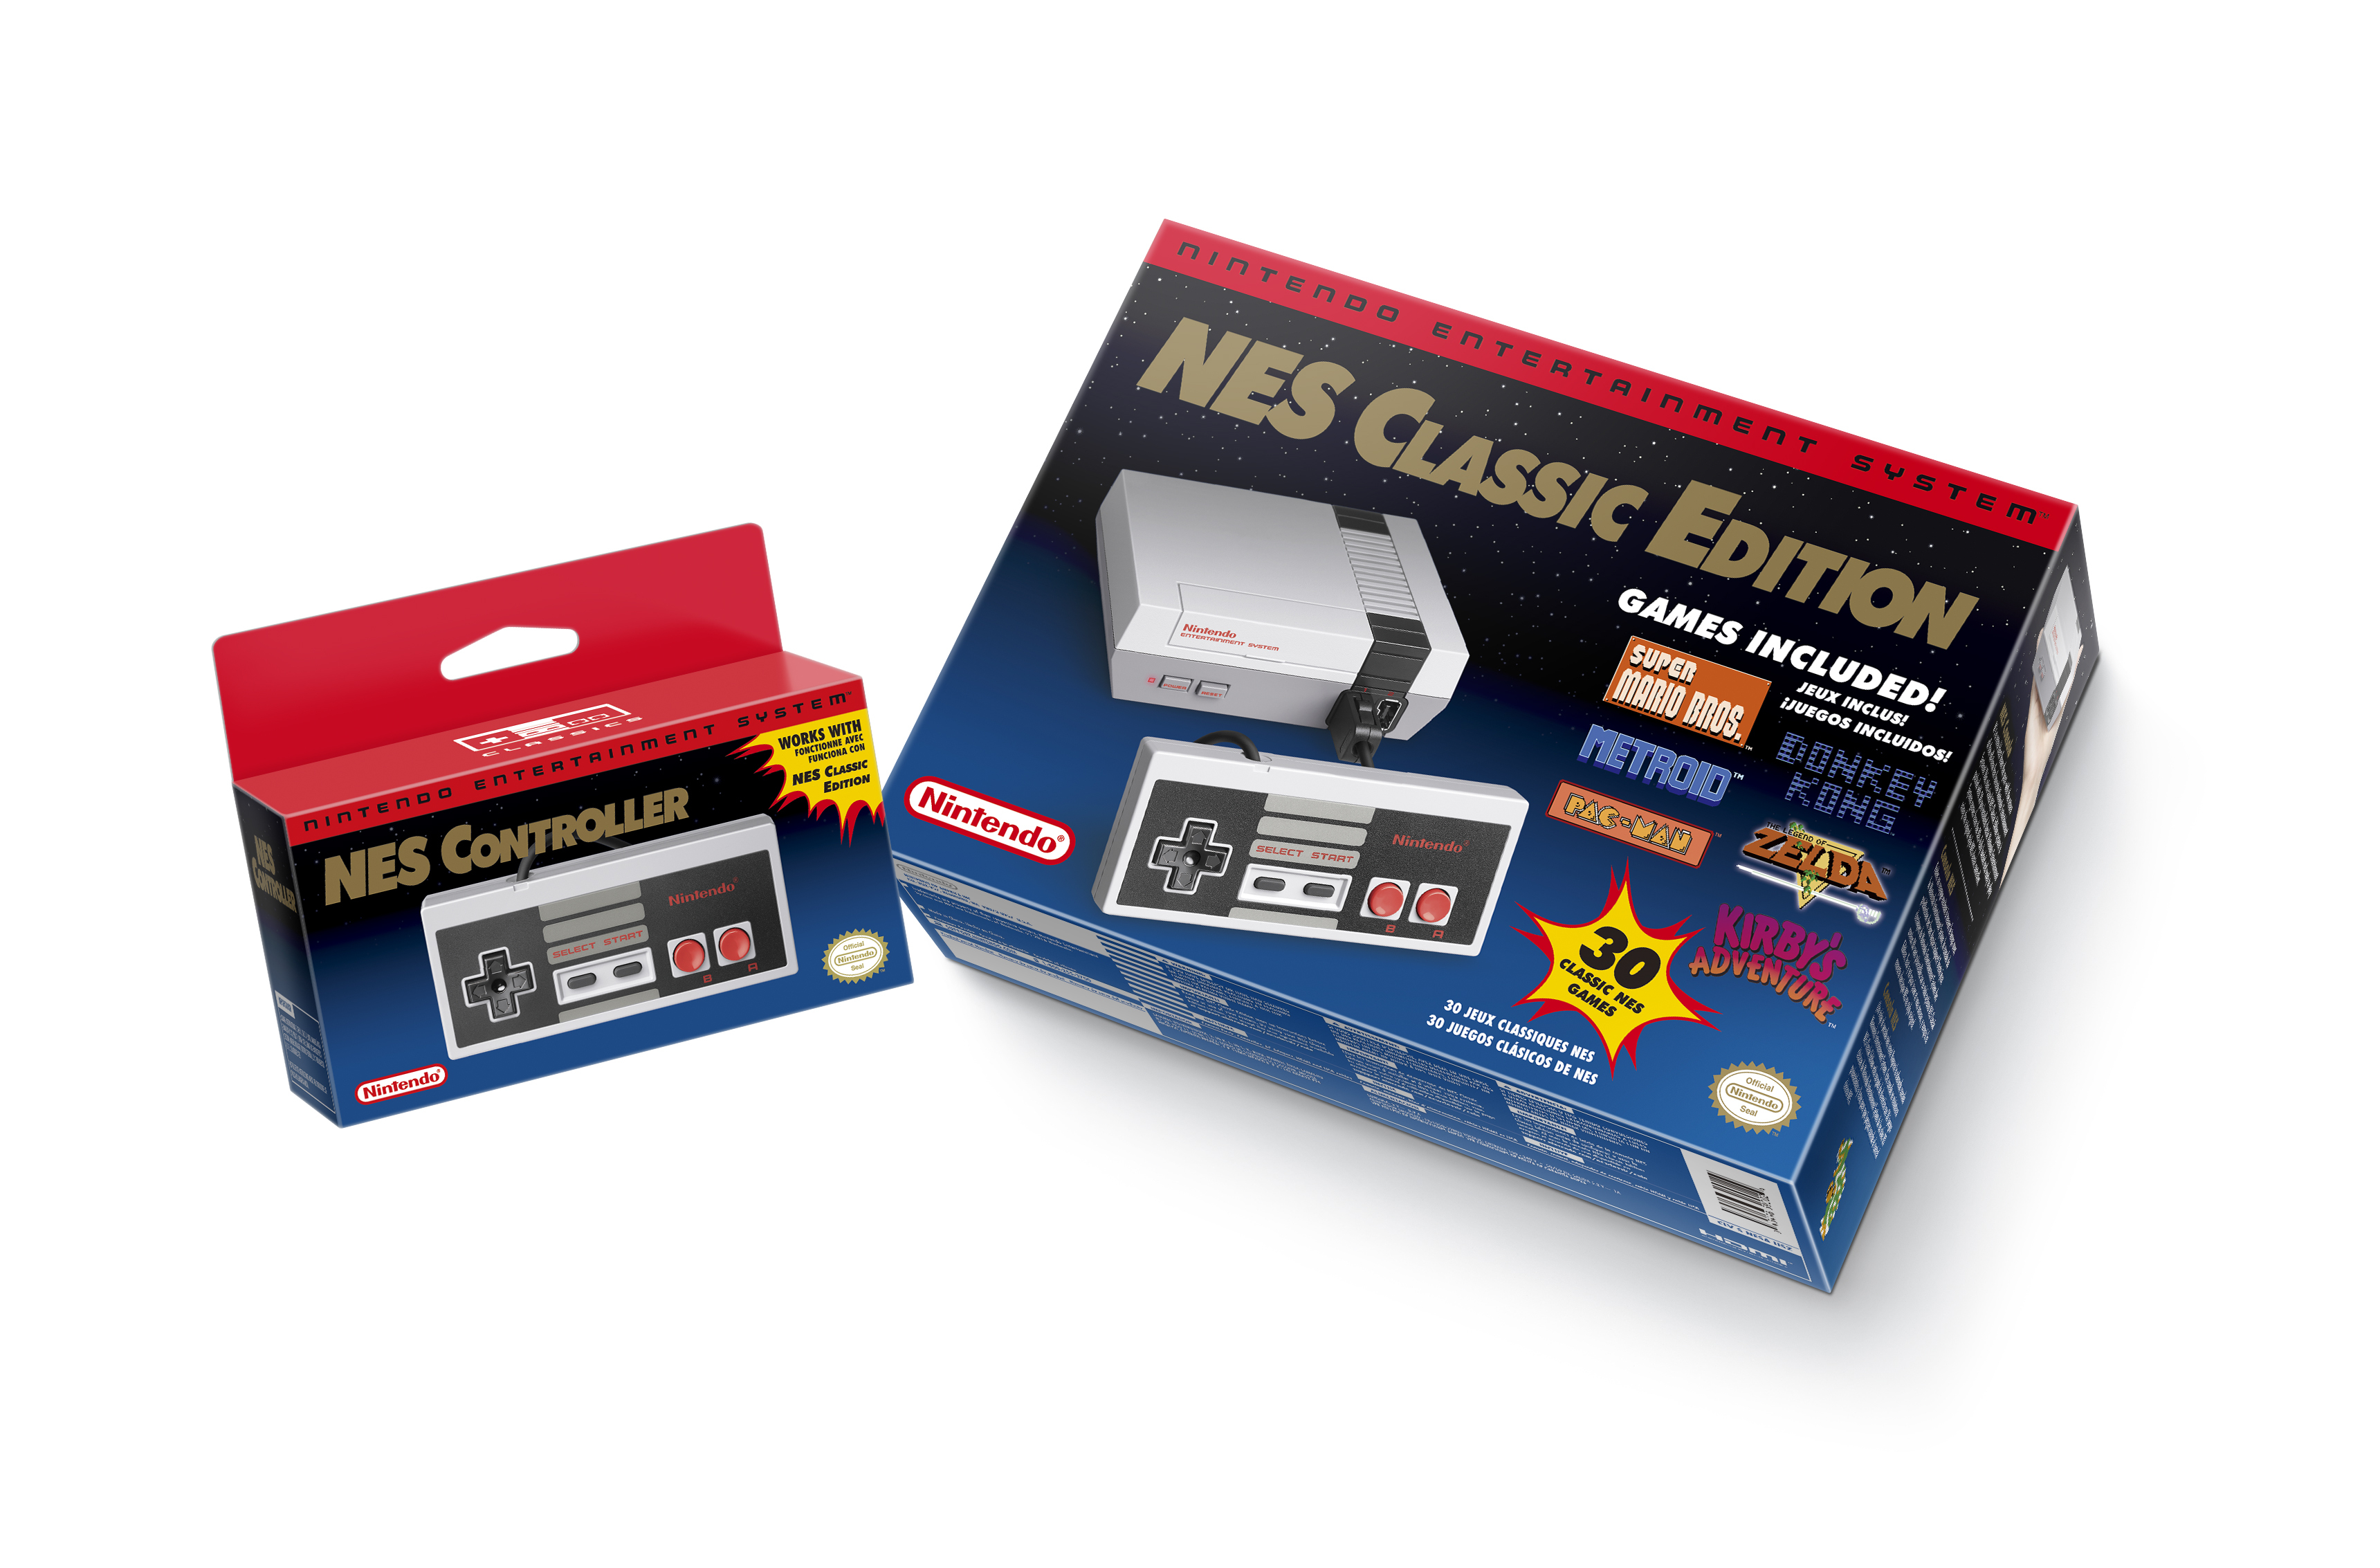 where can i buy nes classic edition